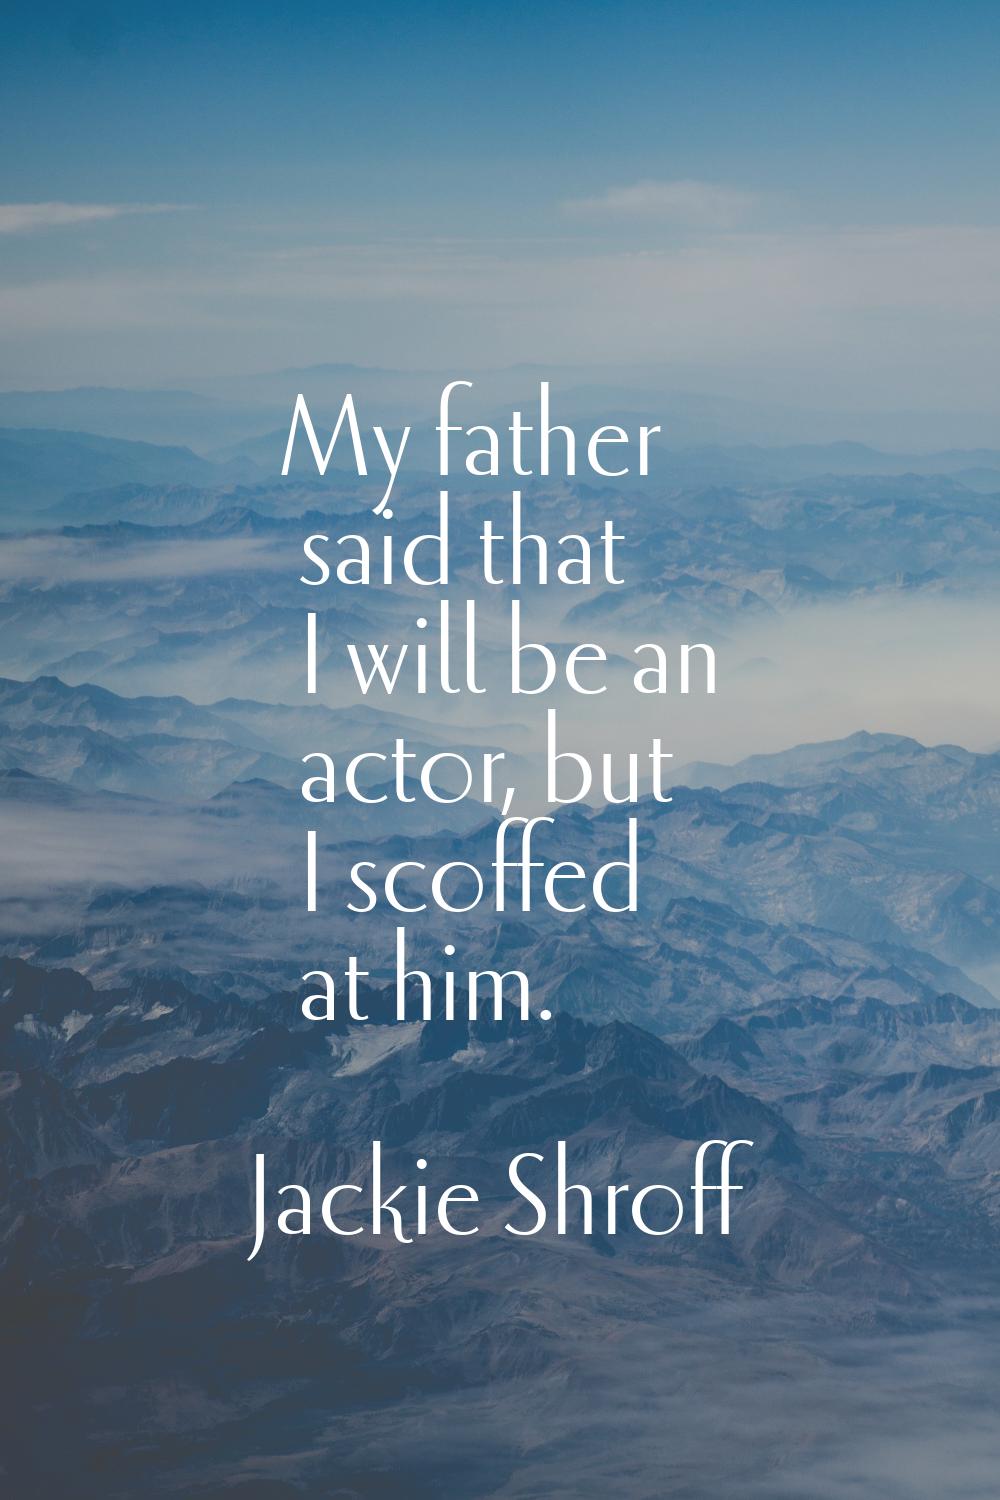 My father said that I will be an actor, but I scoffed at him.